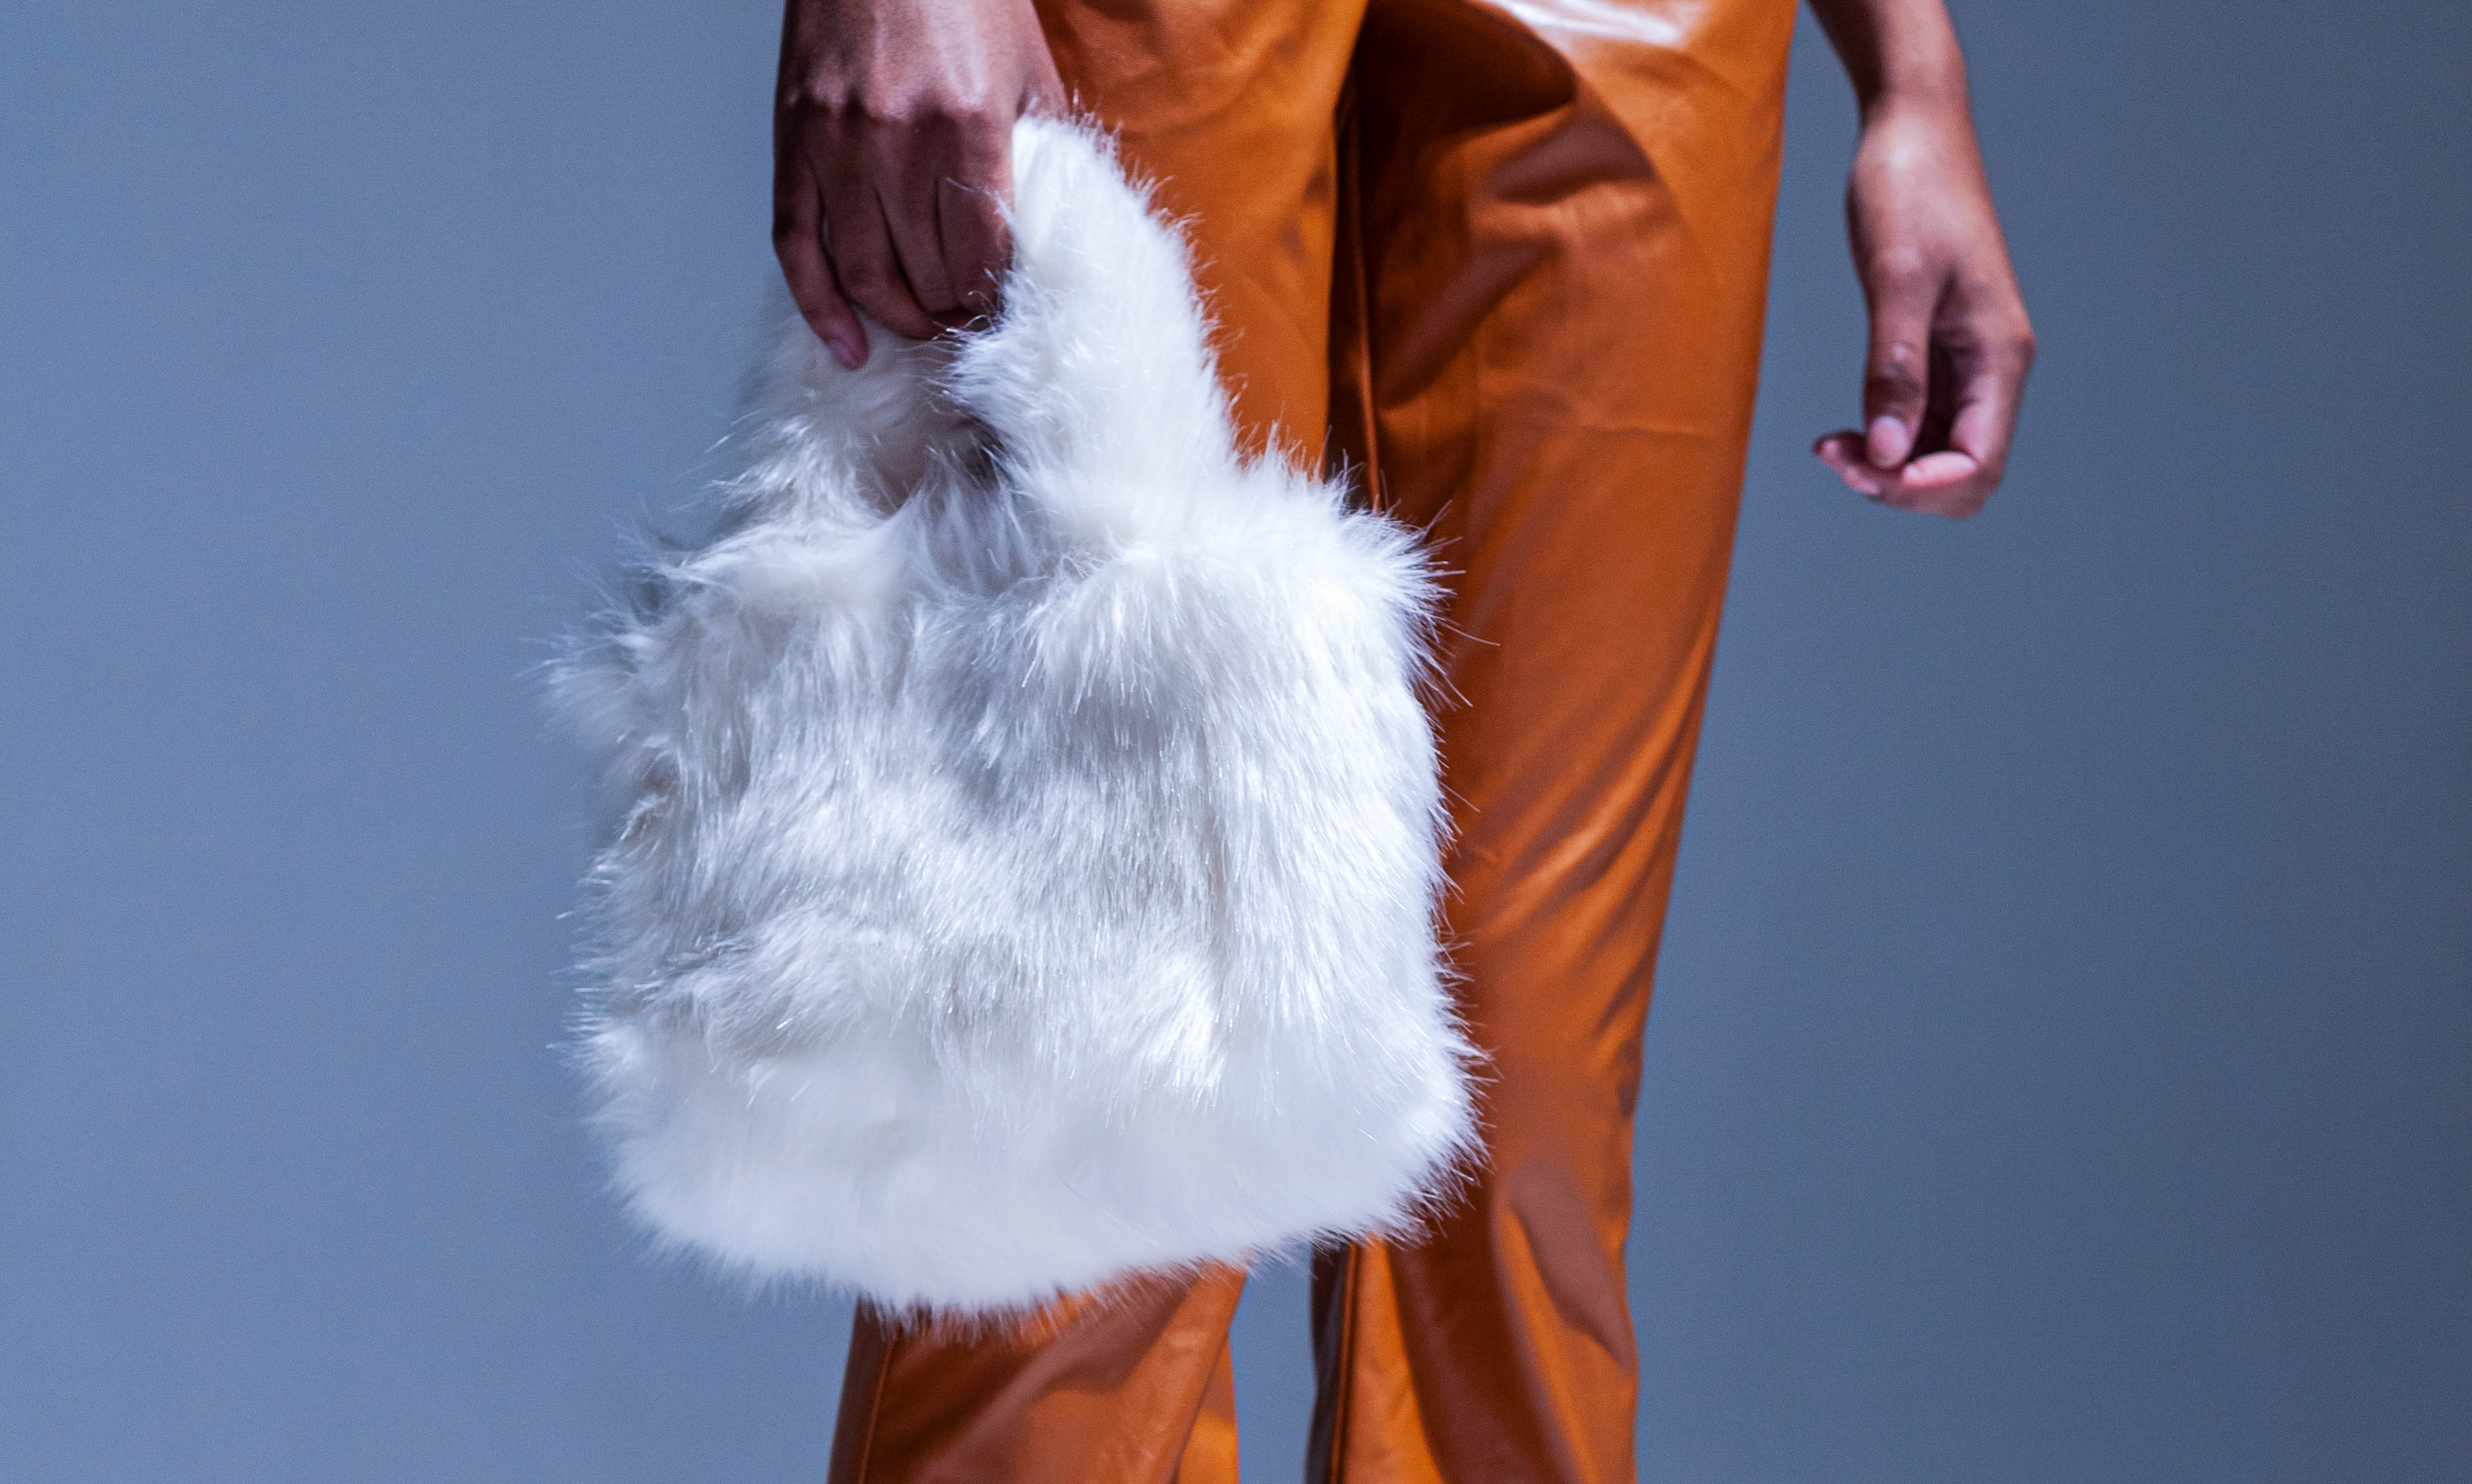 A woman carries a trendy faux fur purse for winter.